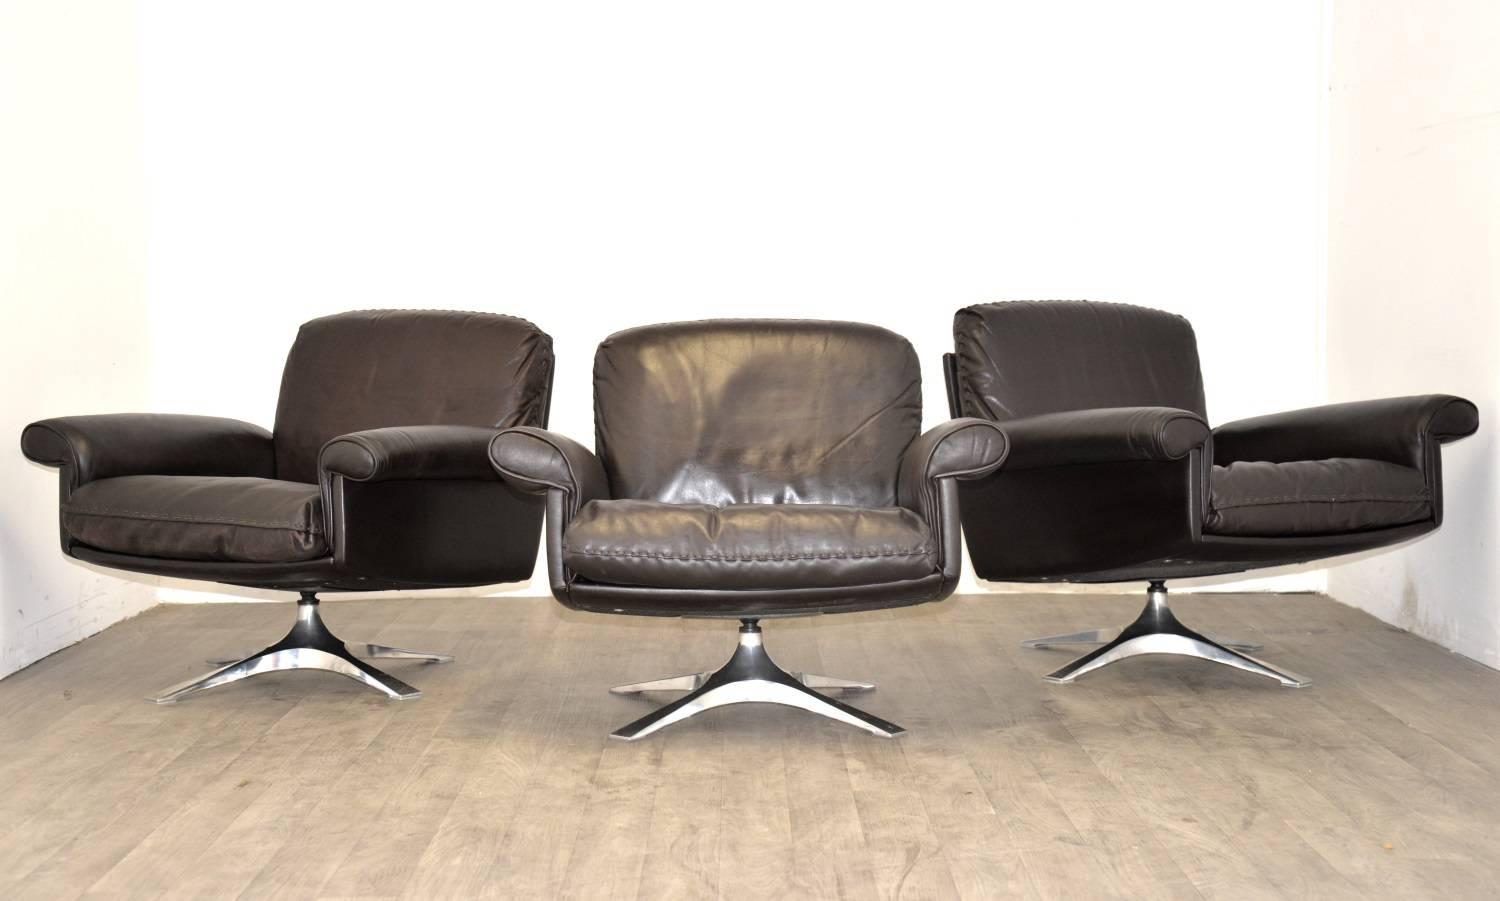 Discounted airfreight for our US and International customers ( from 2 weeks door to door)

The Cambridge Chair Company brings to you three highly desirable retro De Sede DS-31 swivel lounge armchairs in beautiful soft aniline leather with whipstitch